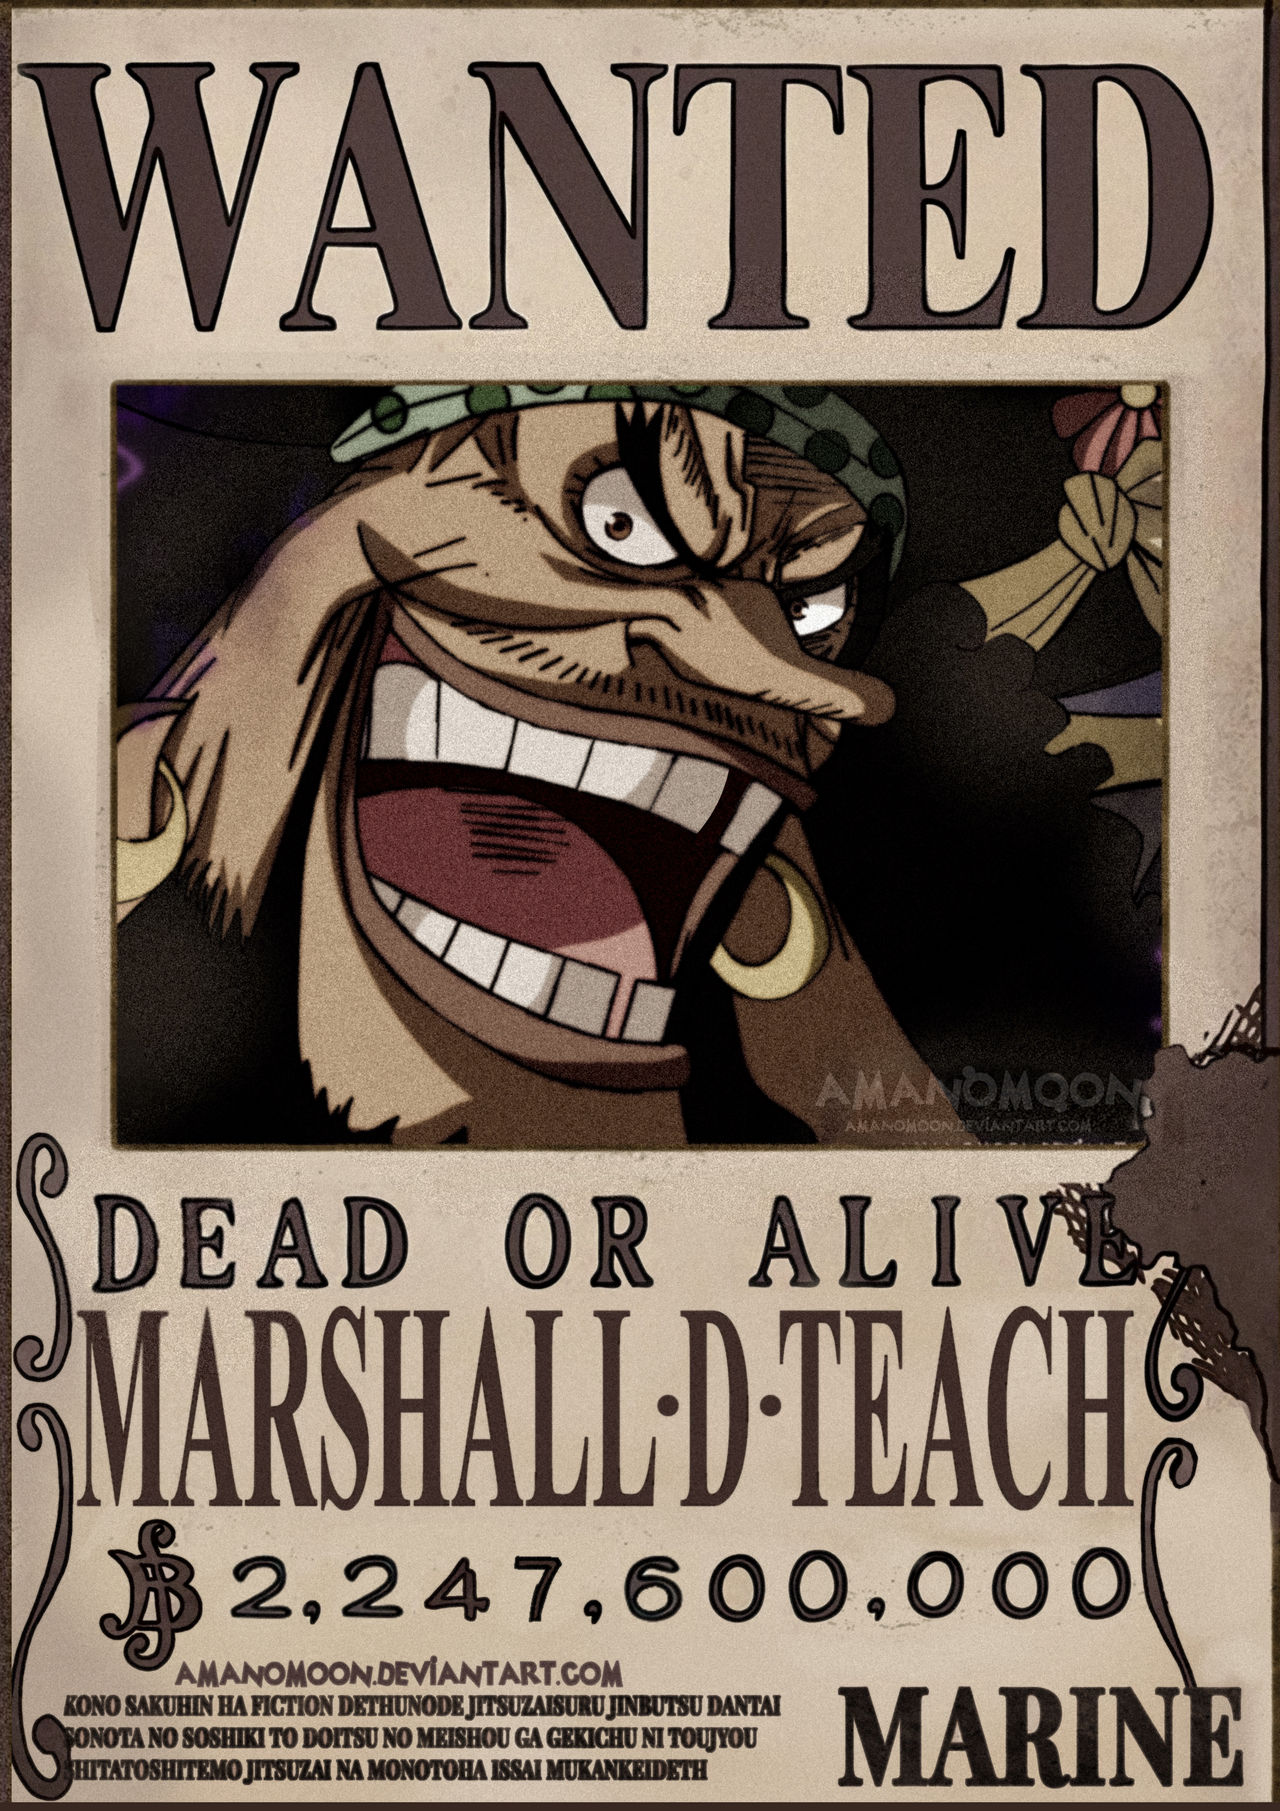 ONE PIECE - Poster - Wanted Barbe Noire